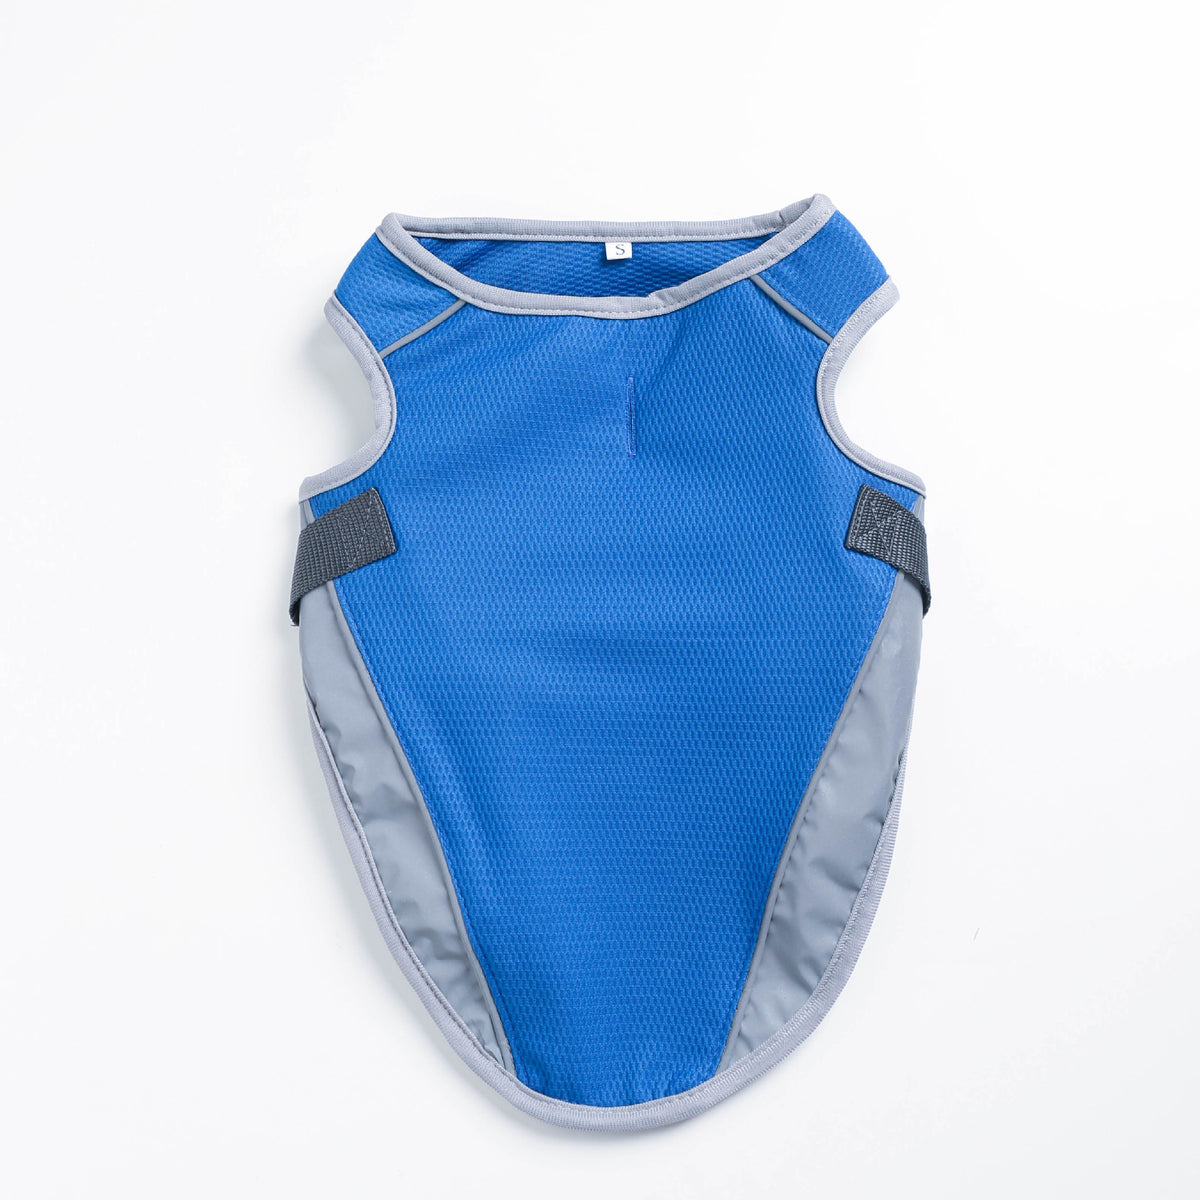 Mesh French Bulldog Cooling Vest - Blue / S - Frenchie Complex Shop